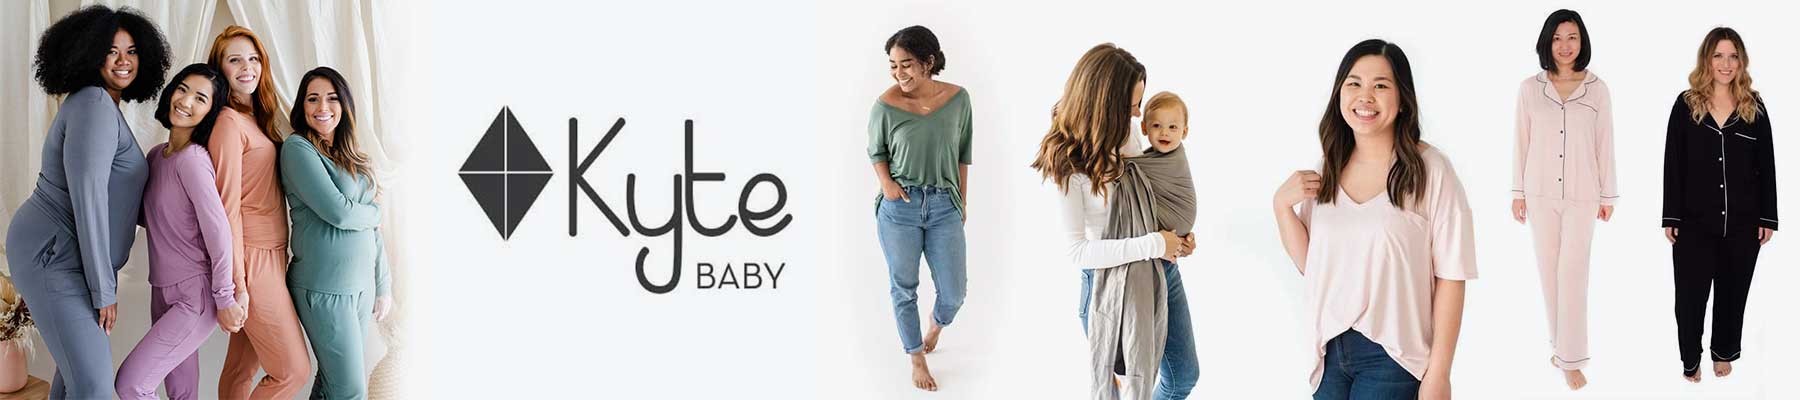 Kyte Baby Women's wear collection